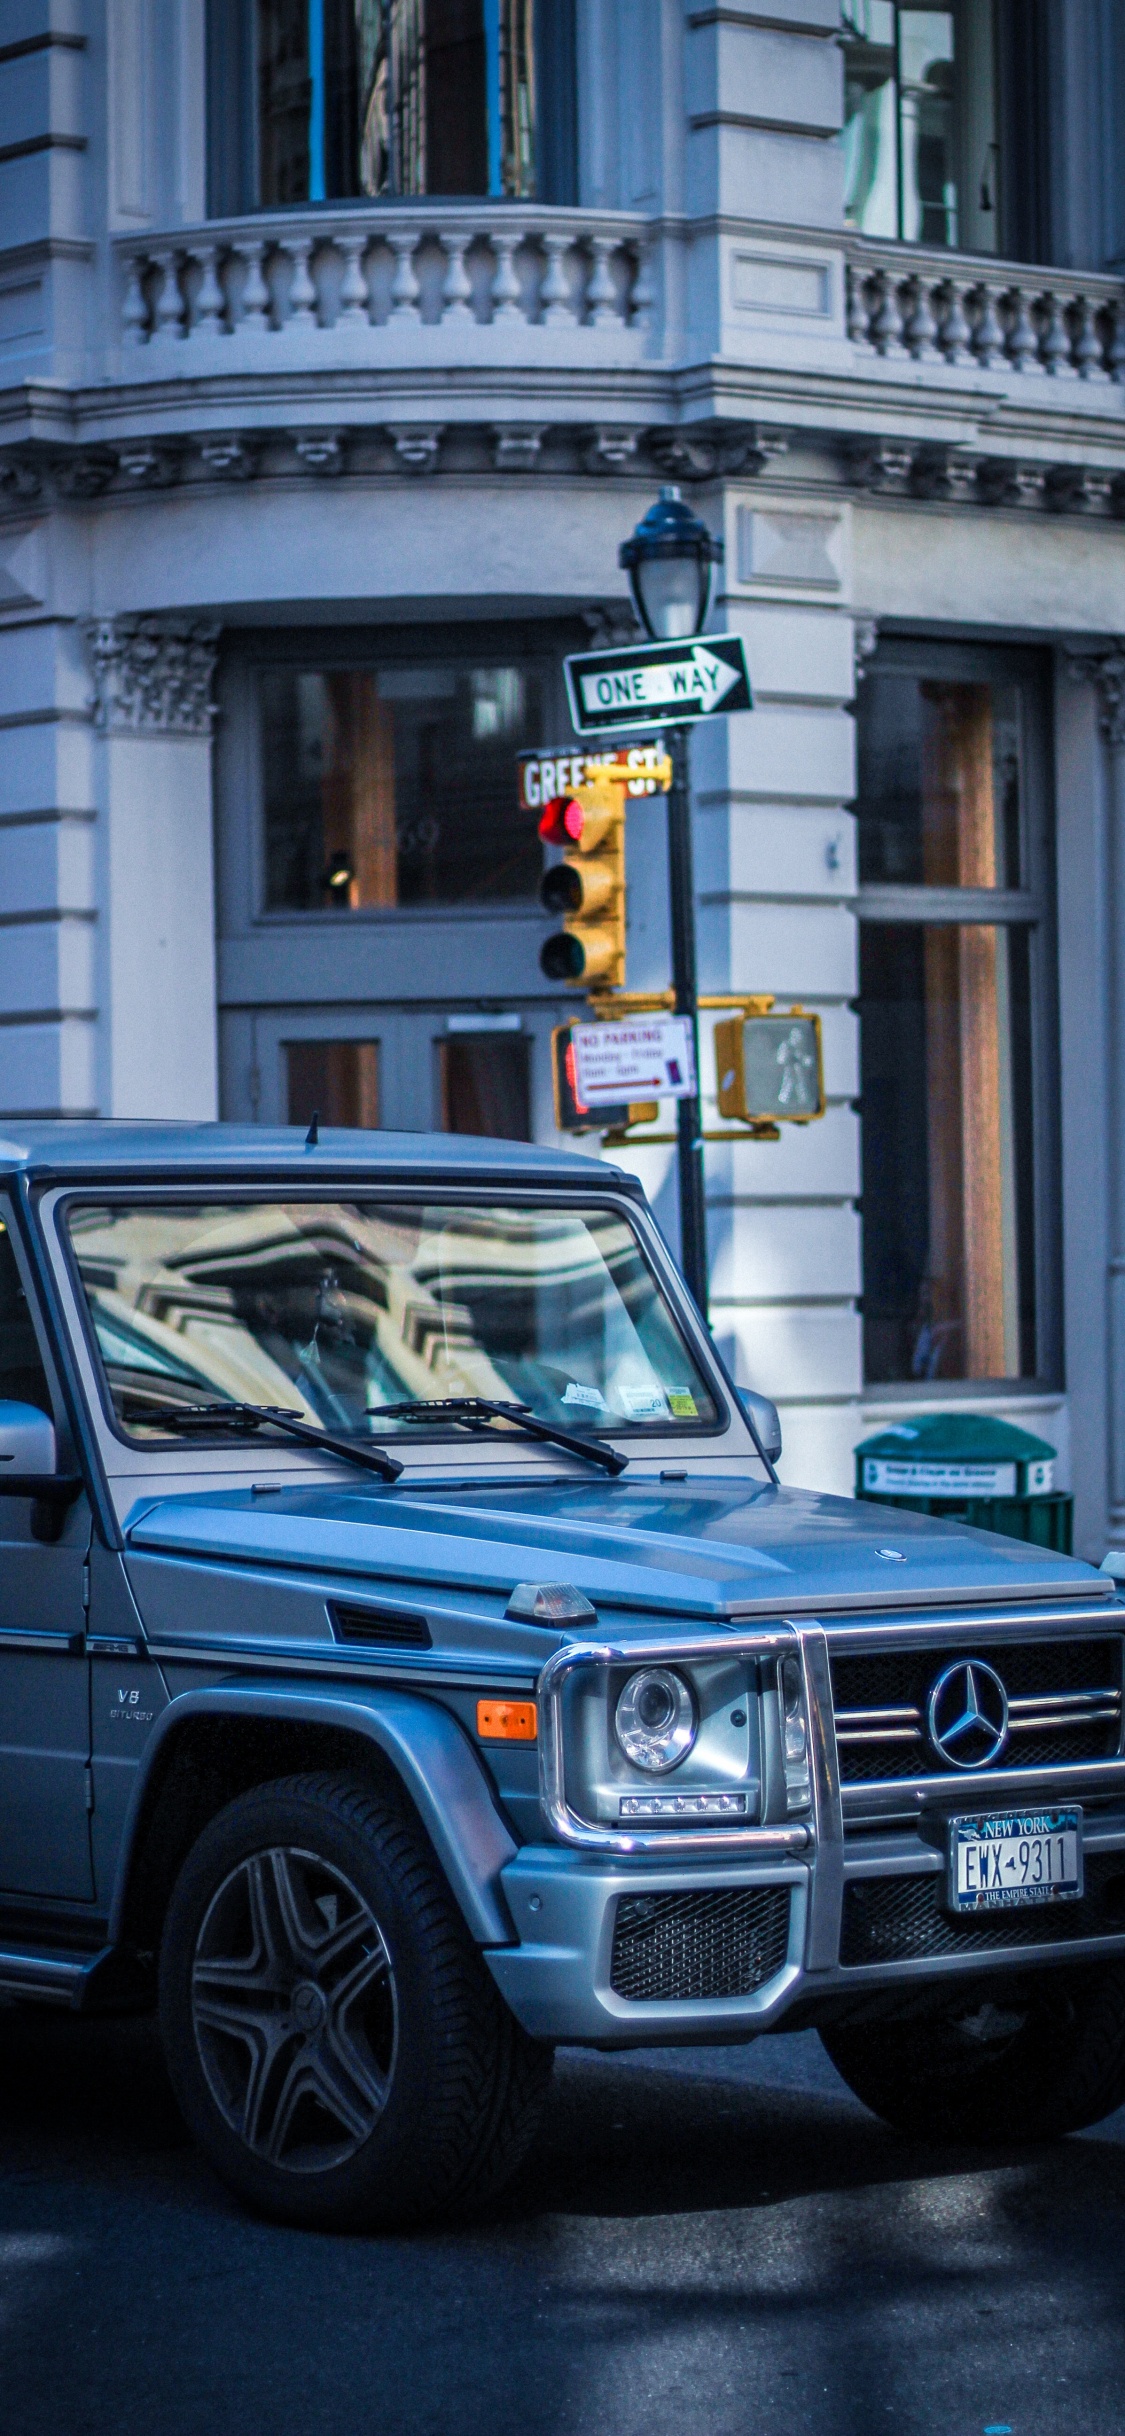 Blue Mercedes Benz g Class Suv Parked Beside White Concrete Building During Daytime. Wallpaper in 1125x2436 Resolution